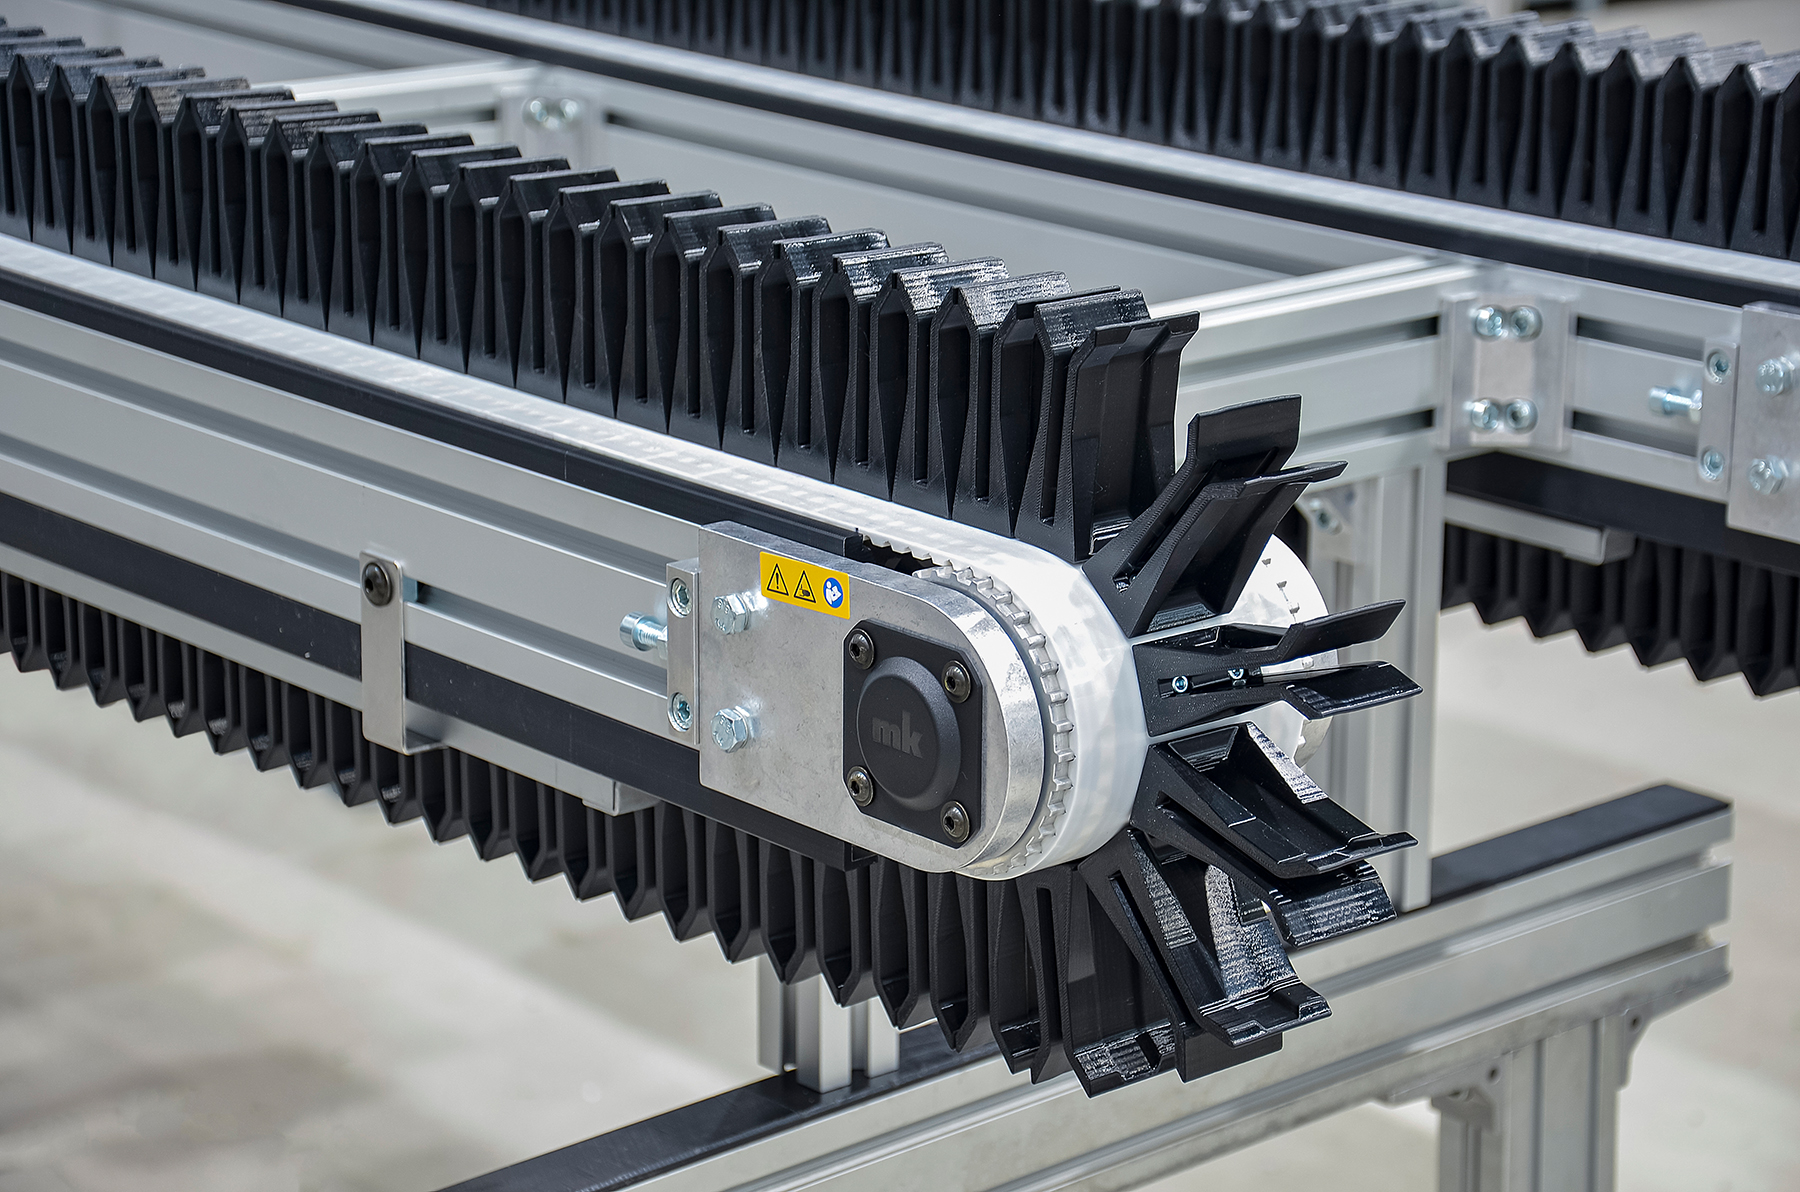 3D-printed holders enable cost-efficient conveying solution